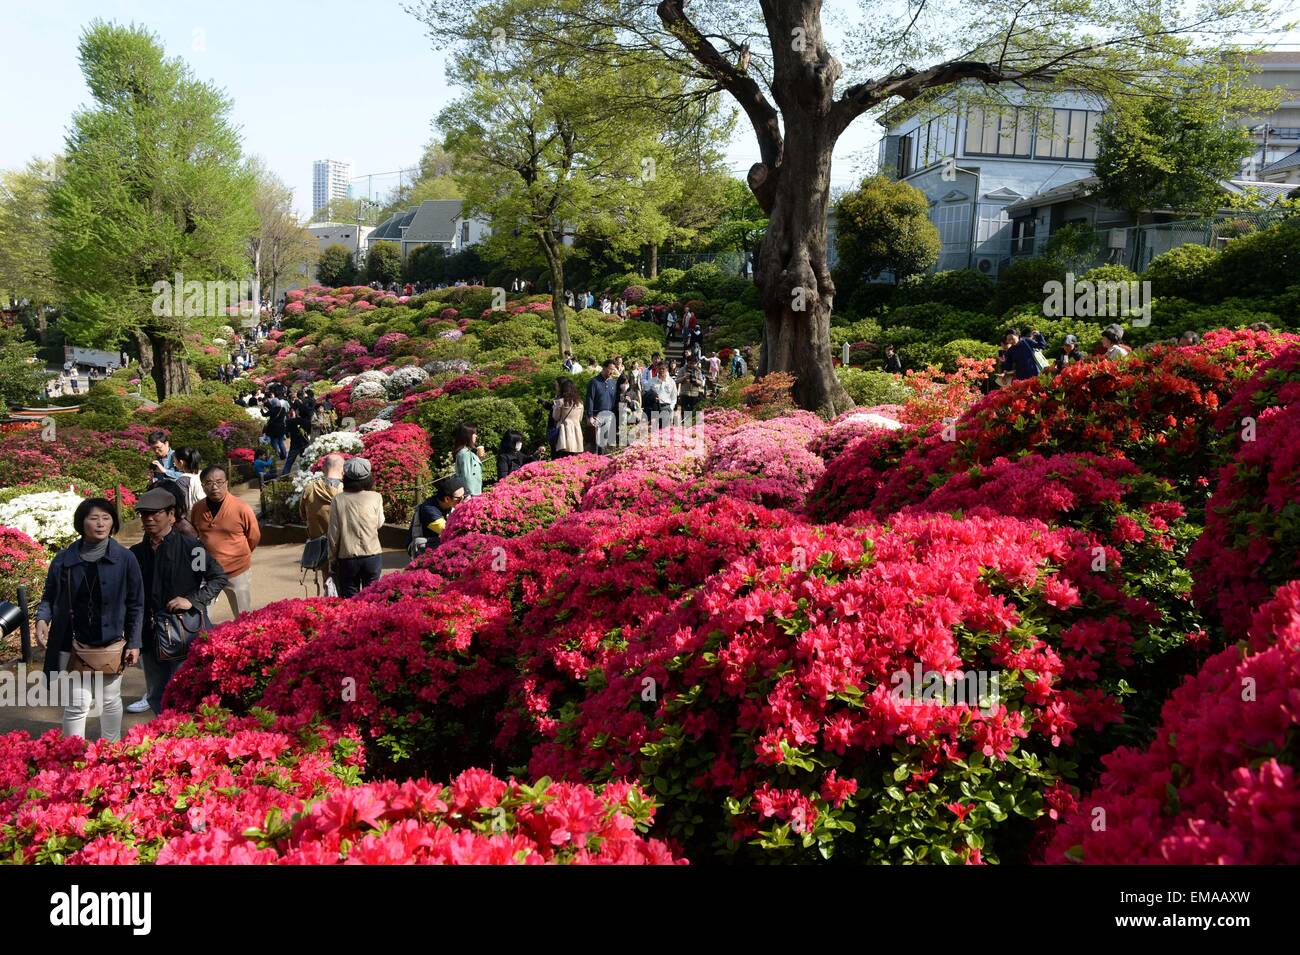 (150418) -- TOKYO, April 18, 2015 (Xinhua) -- Visitors appreciate Rhododendron flowers at the Nedu Jinja in Tokyo, Japan, April 18, 2015. Around 1000 species of rhododendron are in blossom here. (Xinhua/Ma Ping) (zcc) Stock Photo